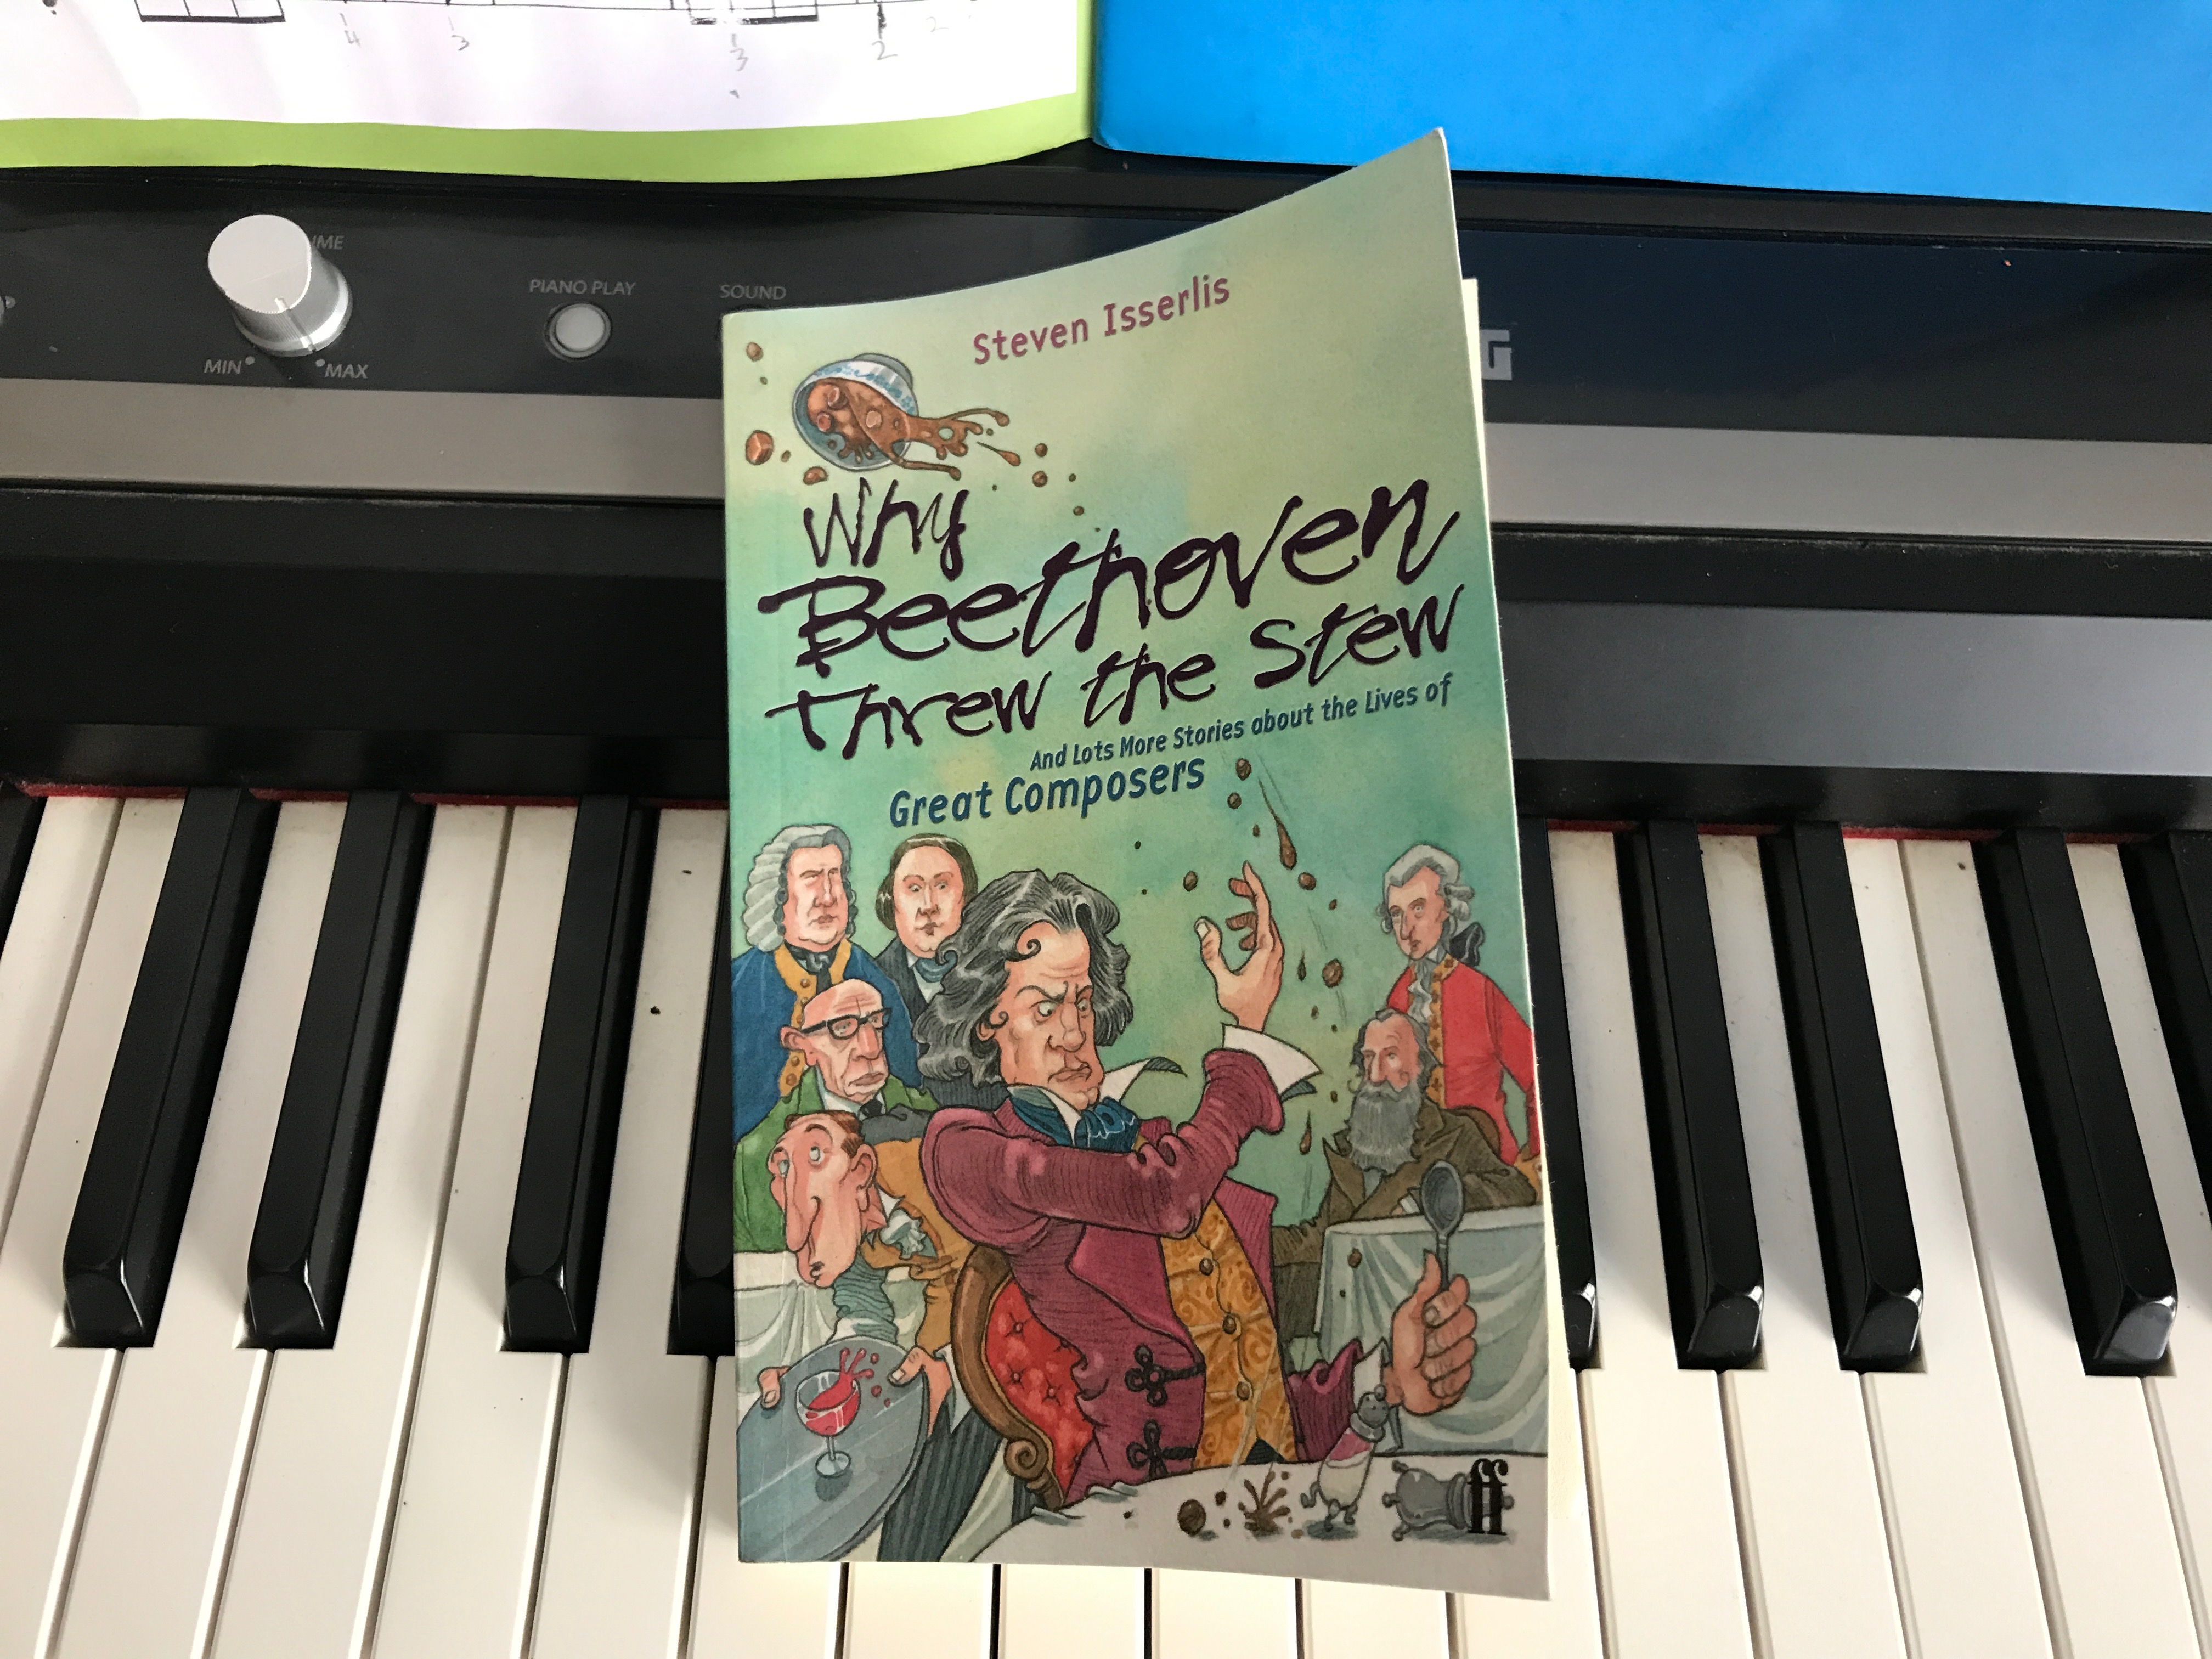 You are currently viewing Why Beethoven Threw the Stew: And Lots More Stories About the Lives of Great Composers by Steven Isserlis